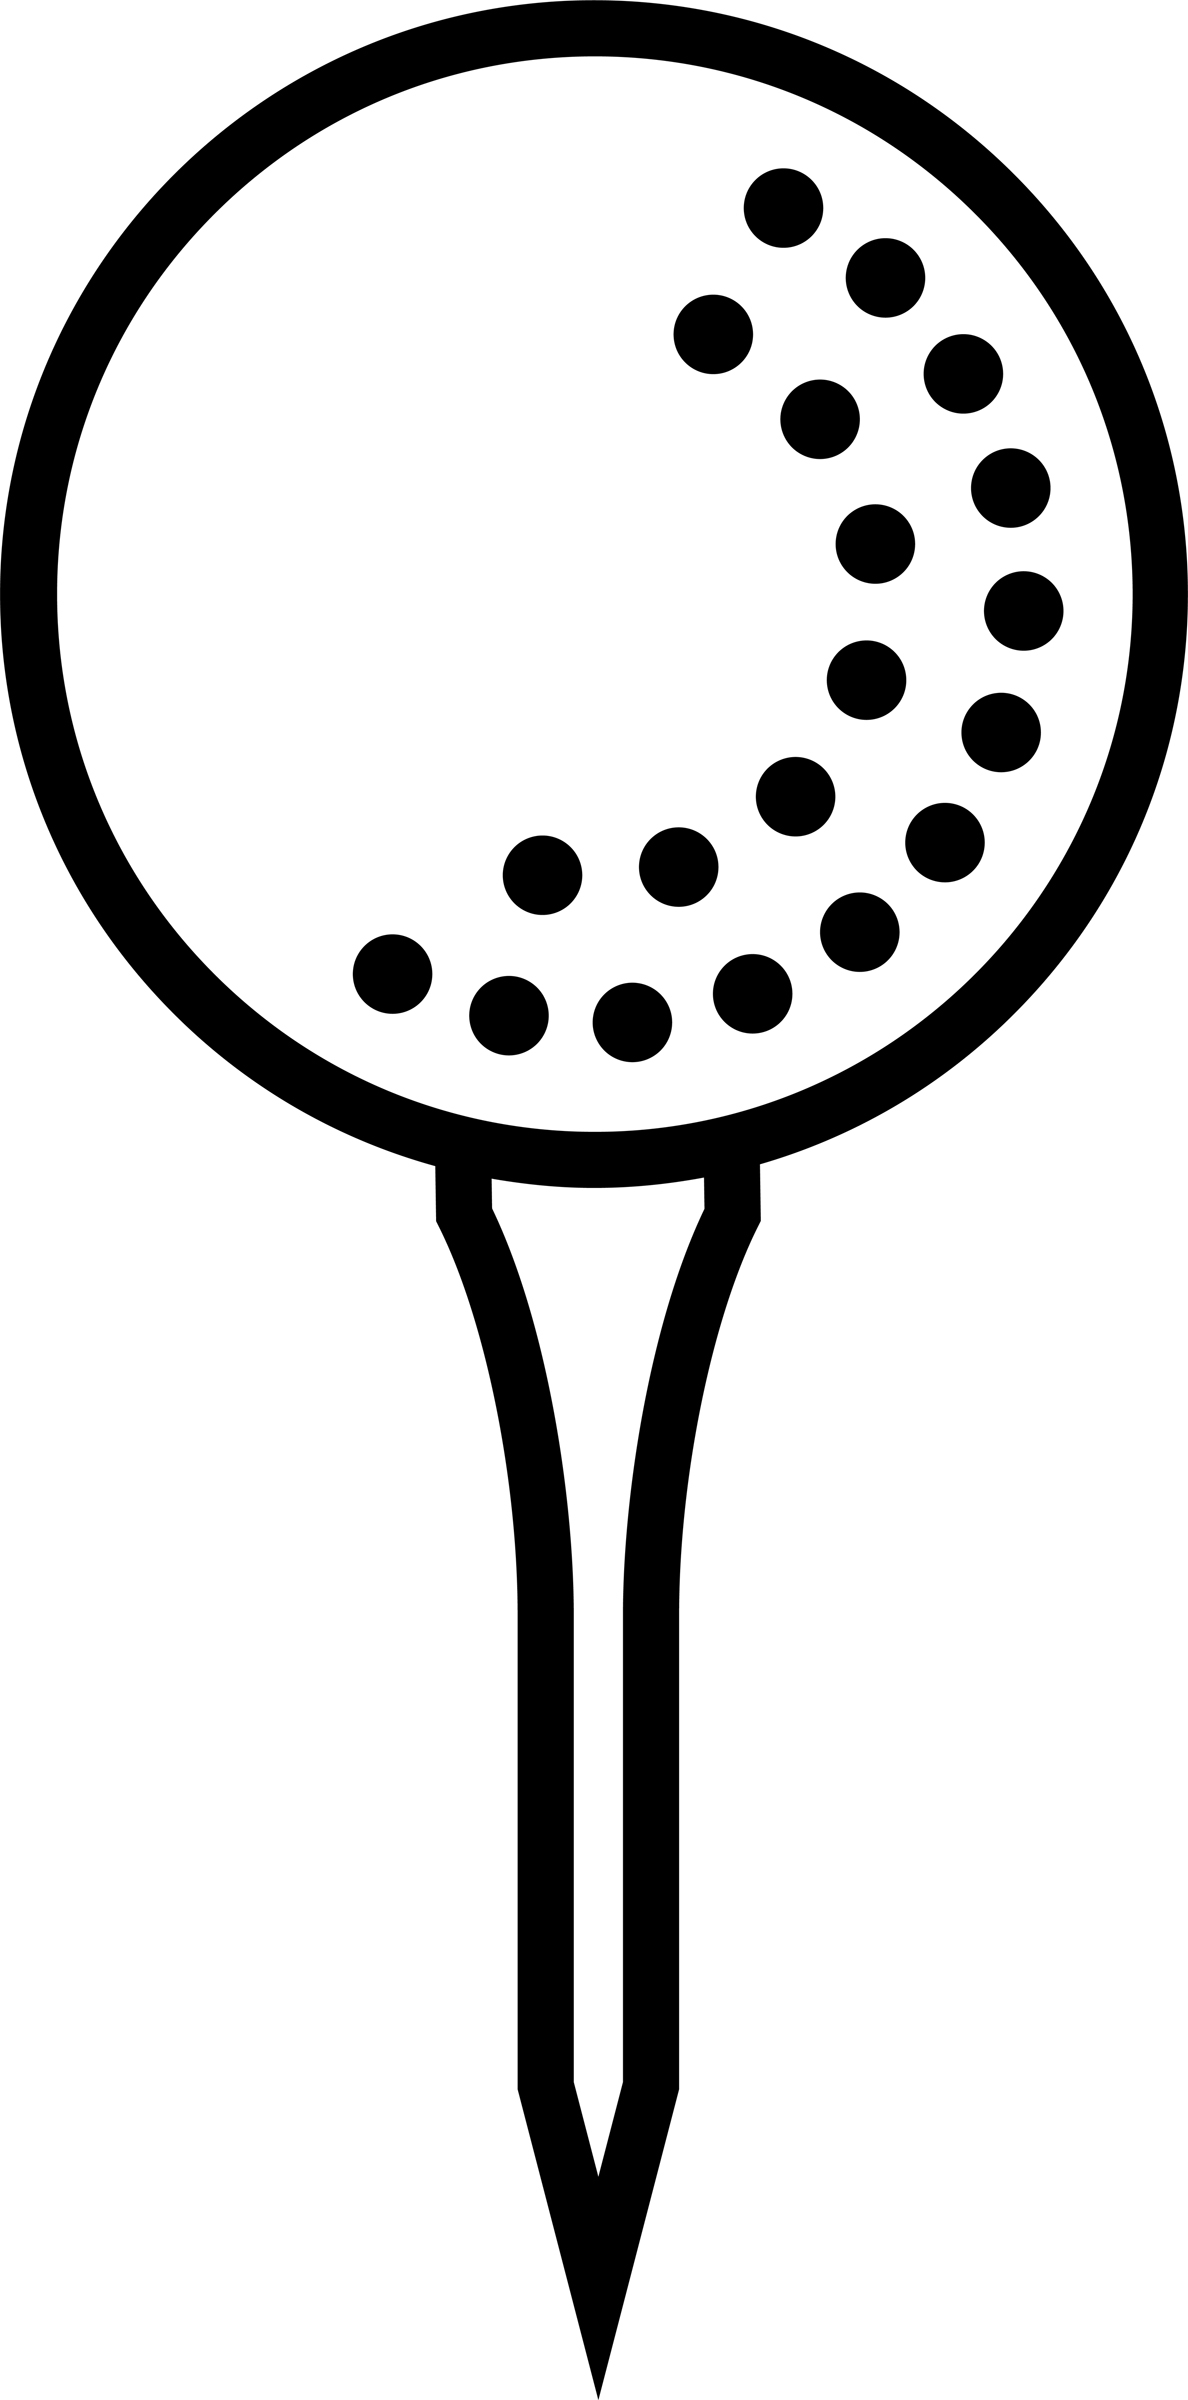 Golf Ball Black And White | Clipart Panda - Free Clipart Images